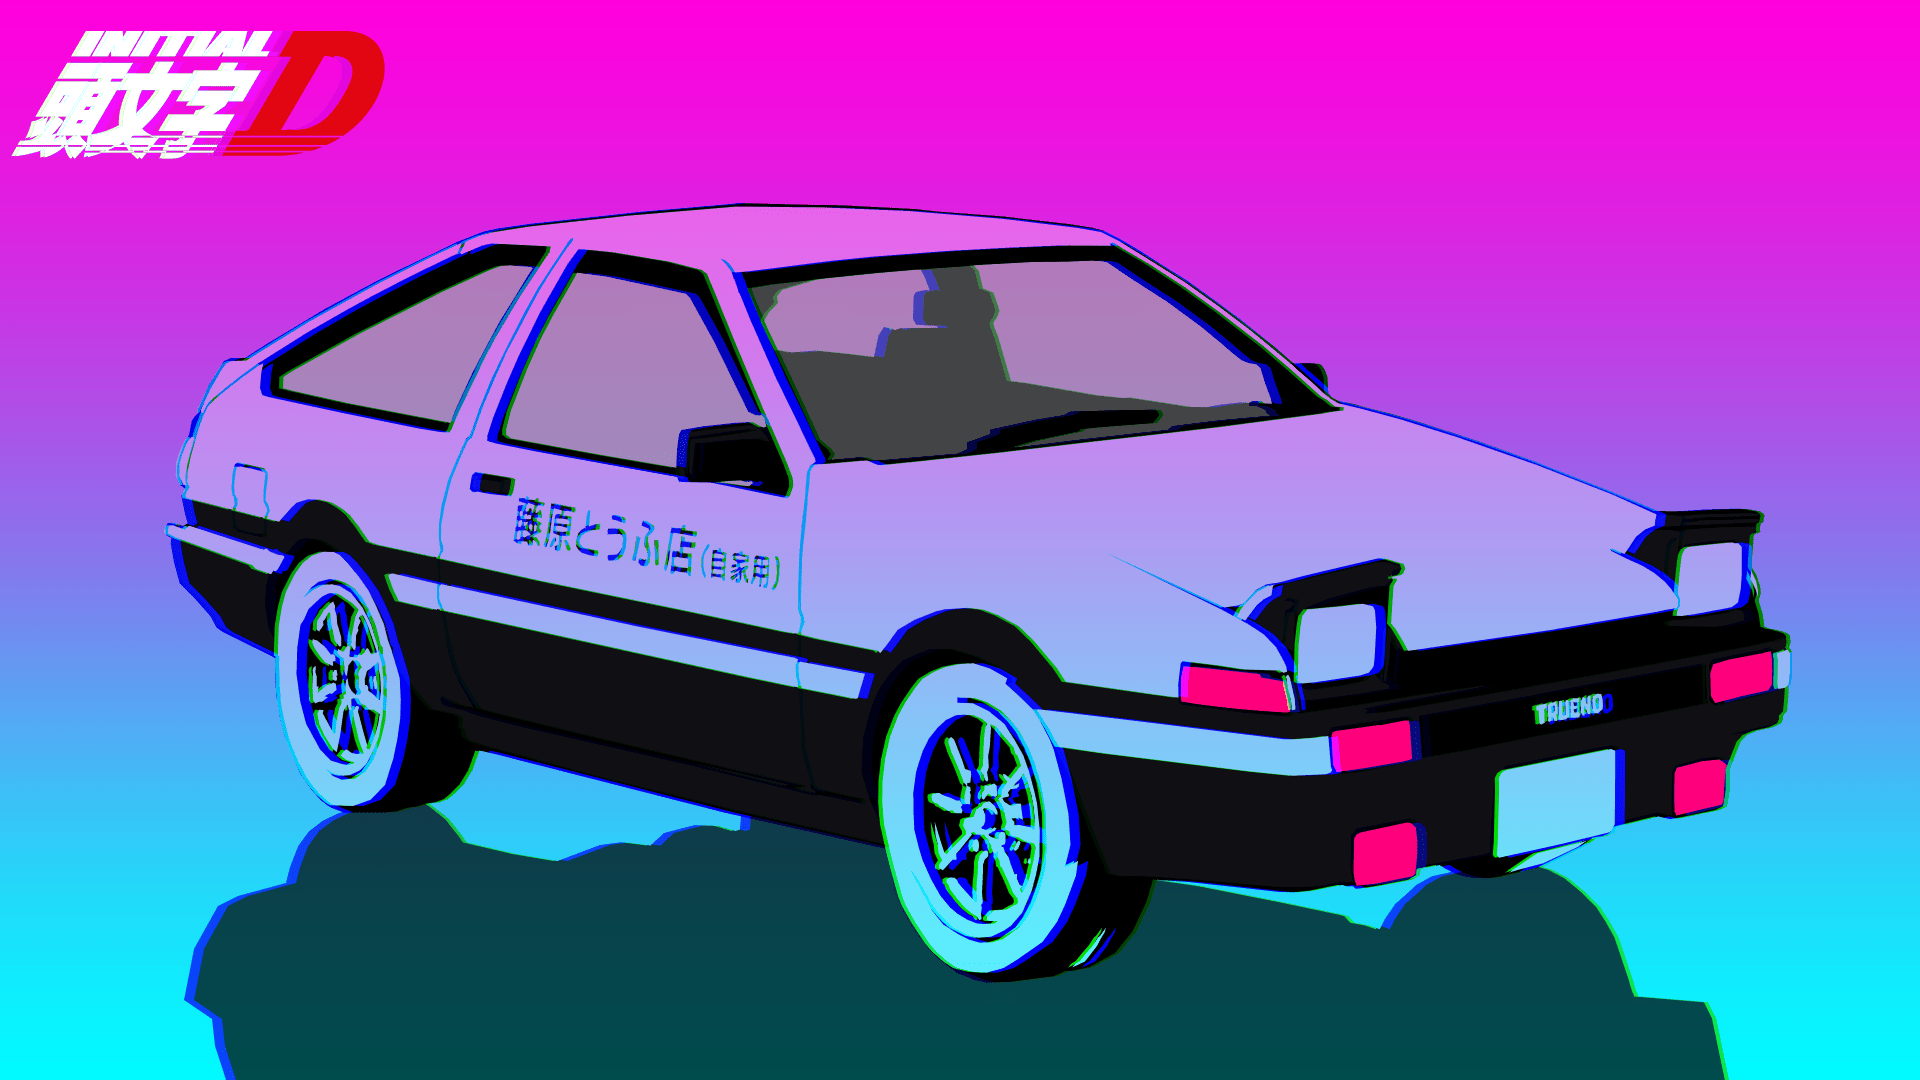 A vector illustration of the Toyota Sprinter Trueno from the anime Initial D. - Toyota AE86